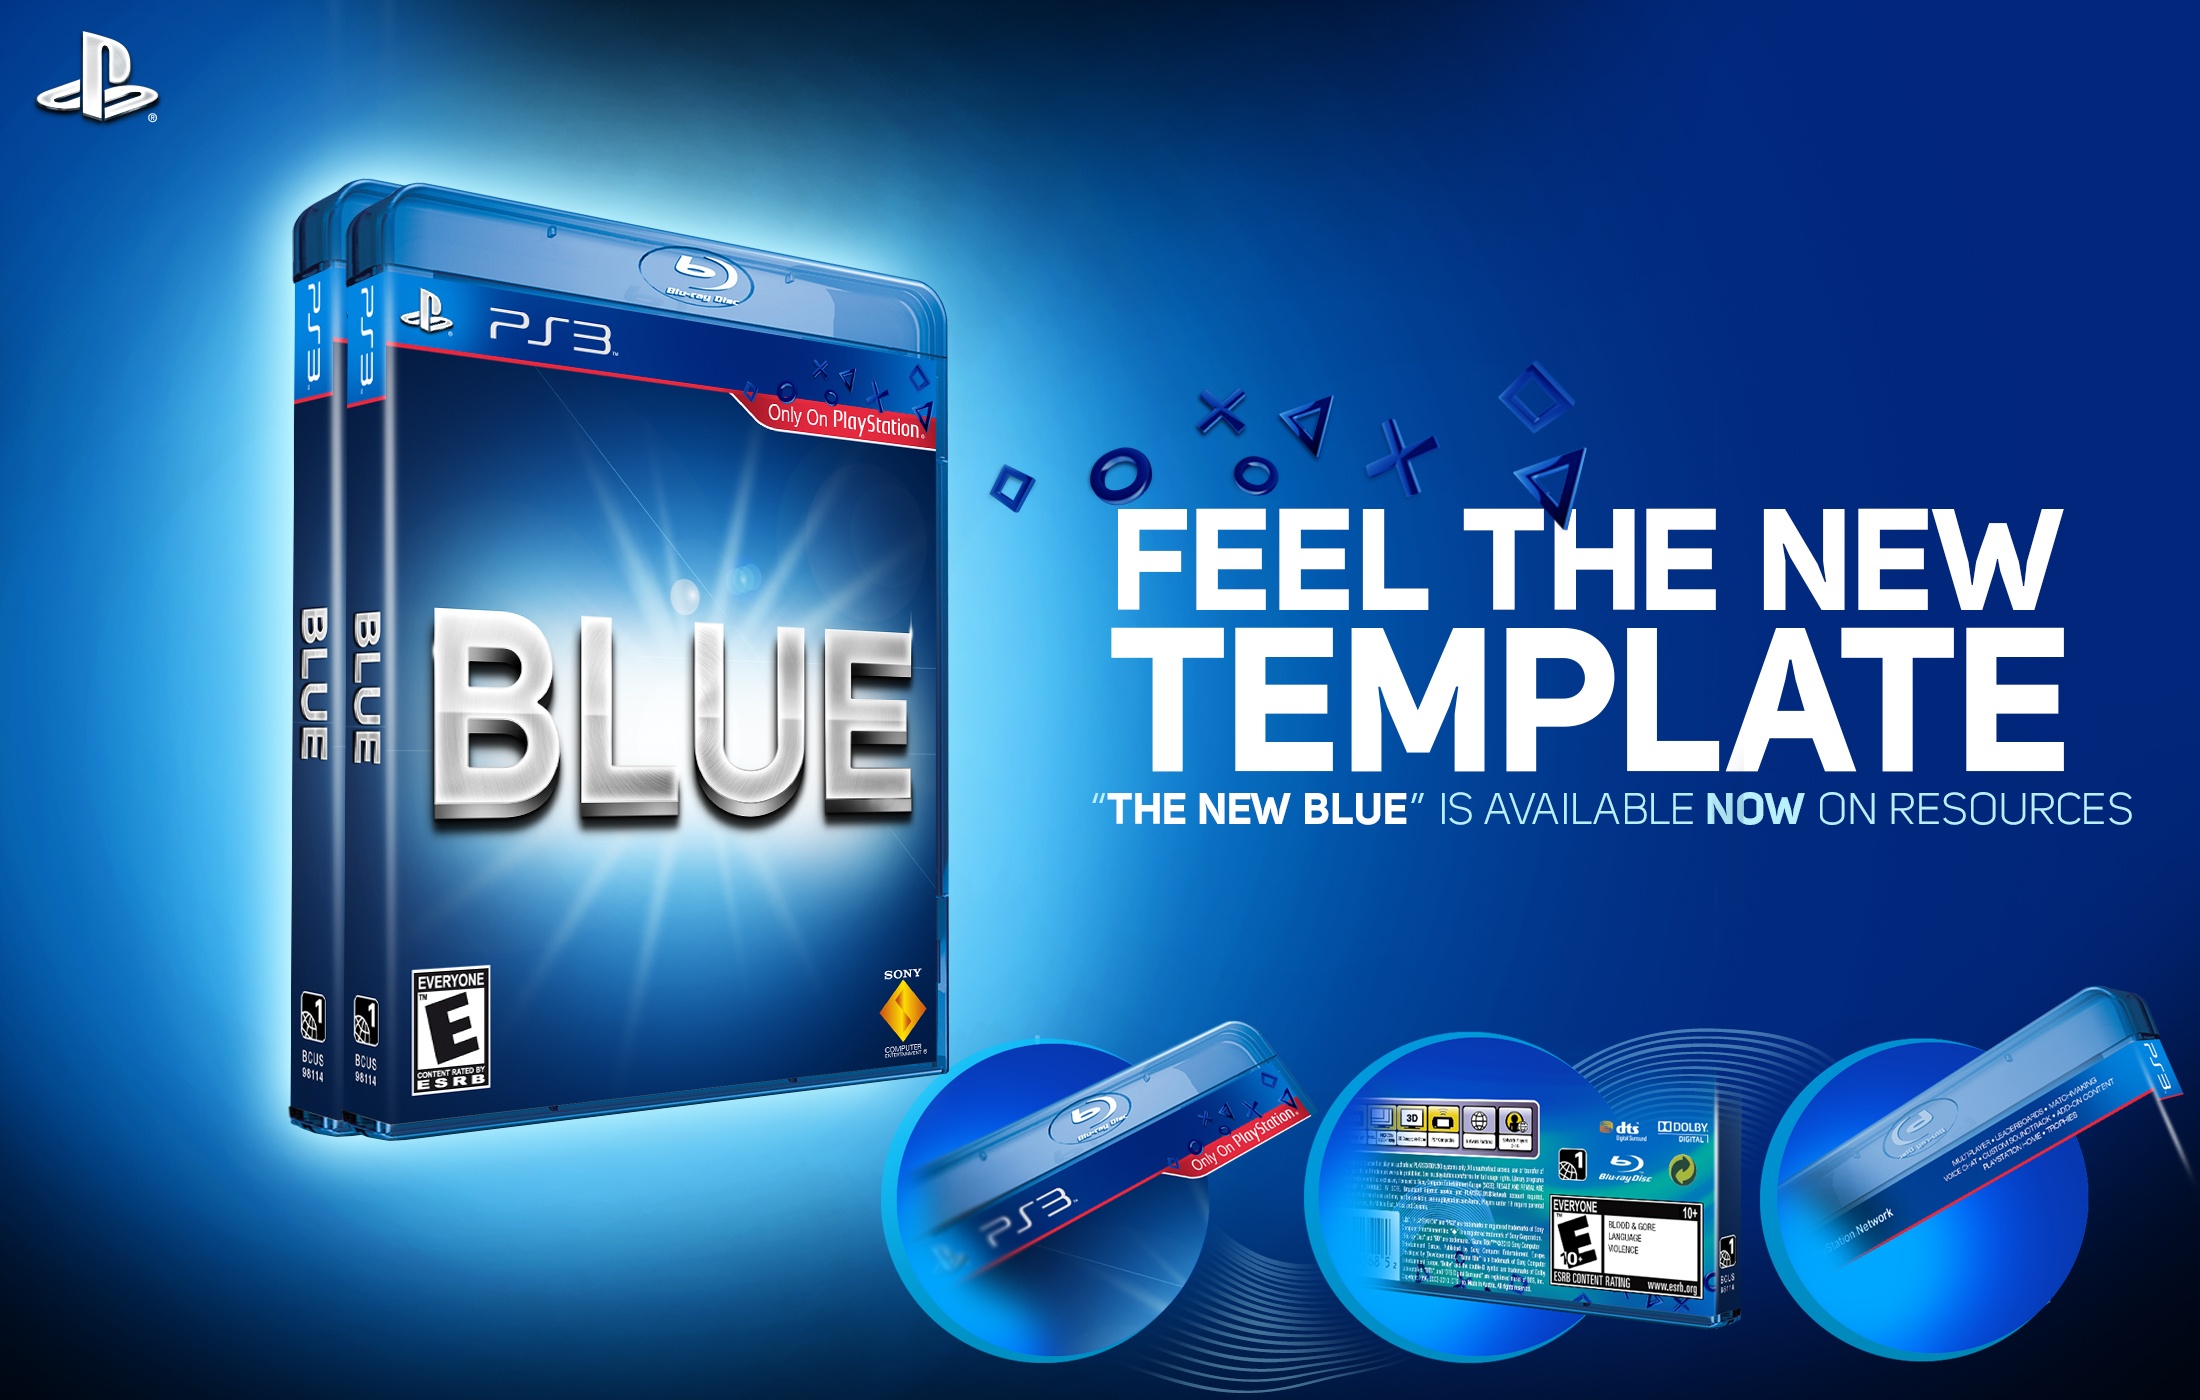 The New Blue Template box cover